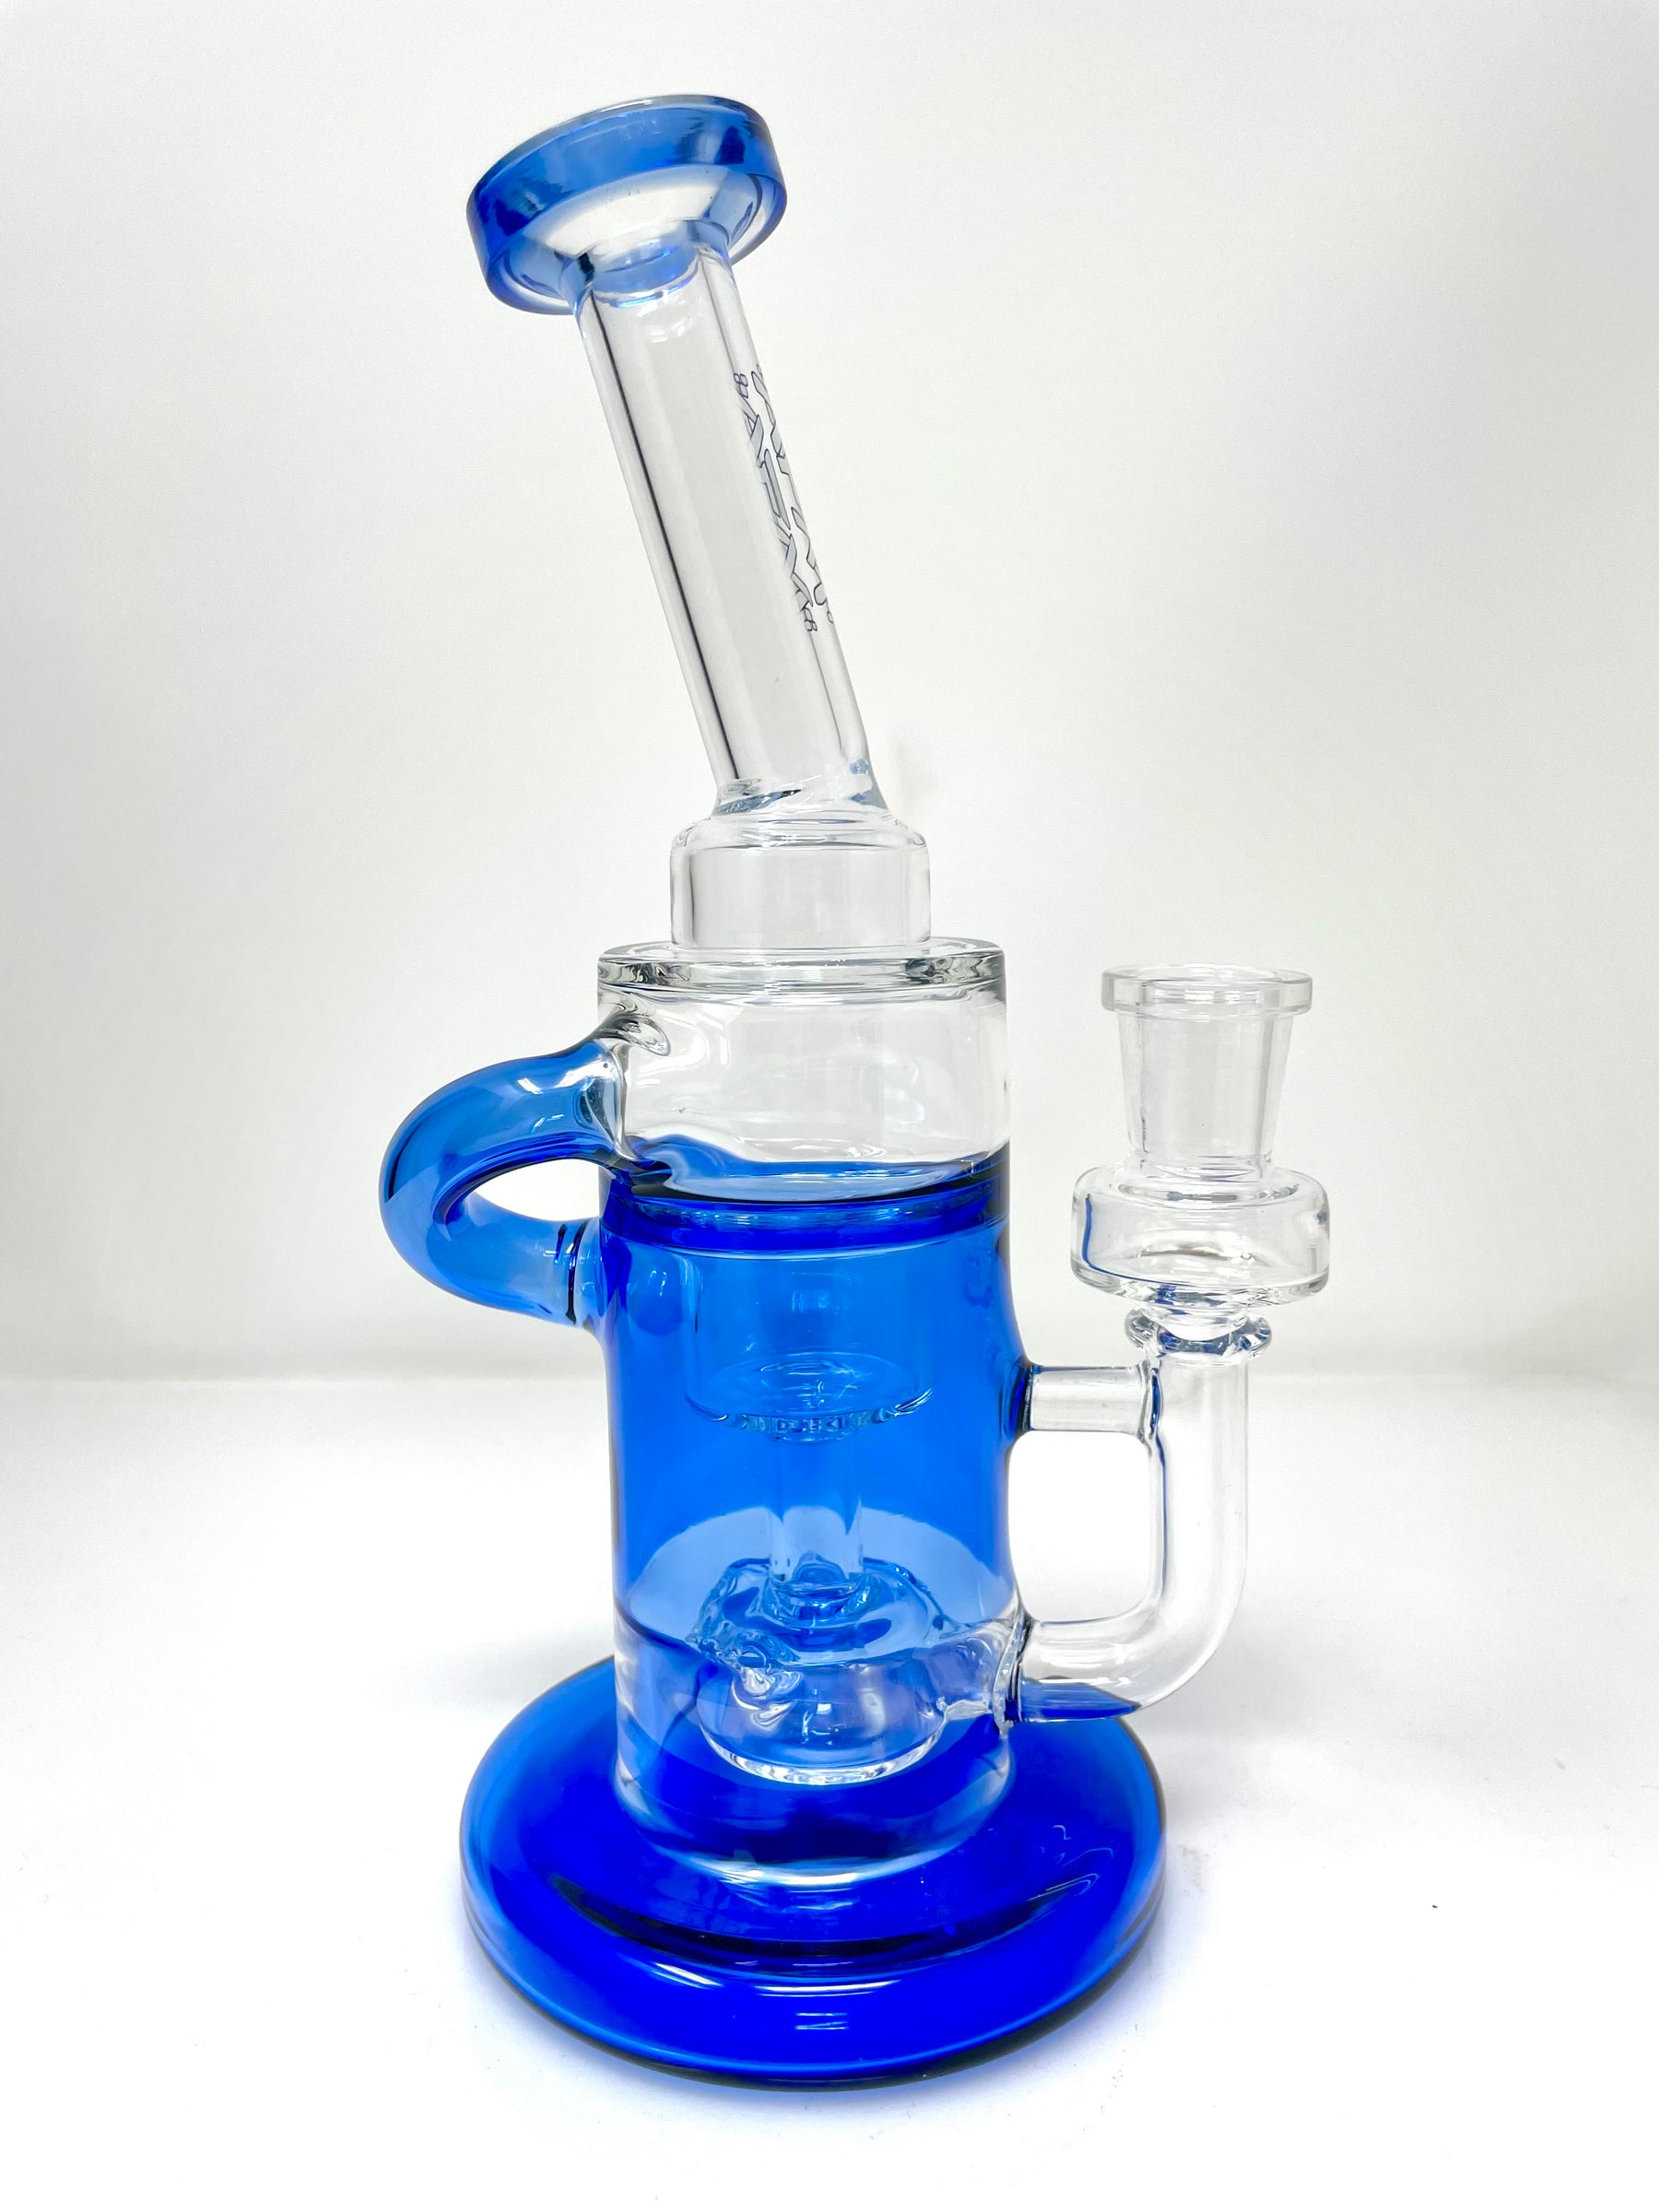 8.5" Power Glass Incycler Dab Rig